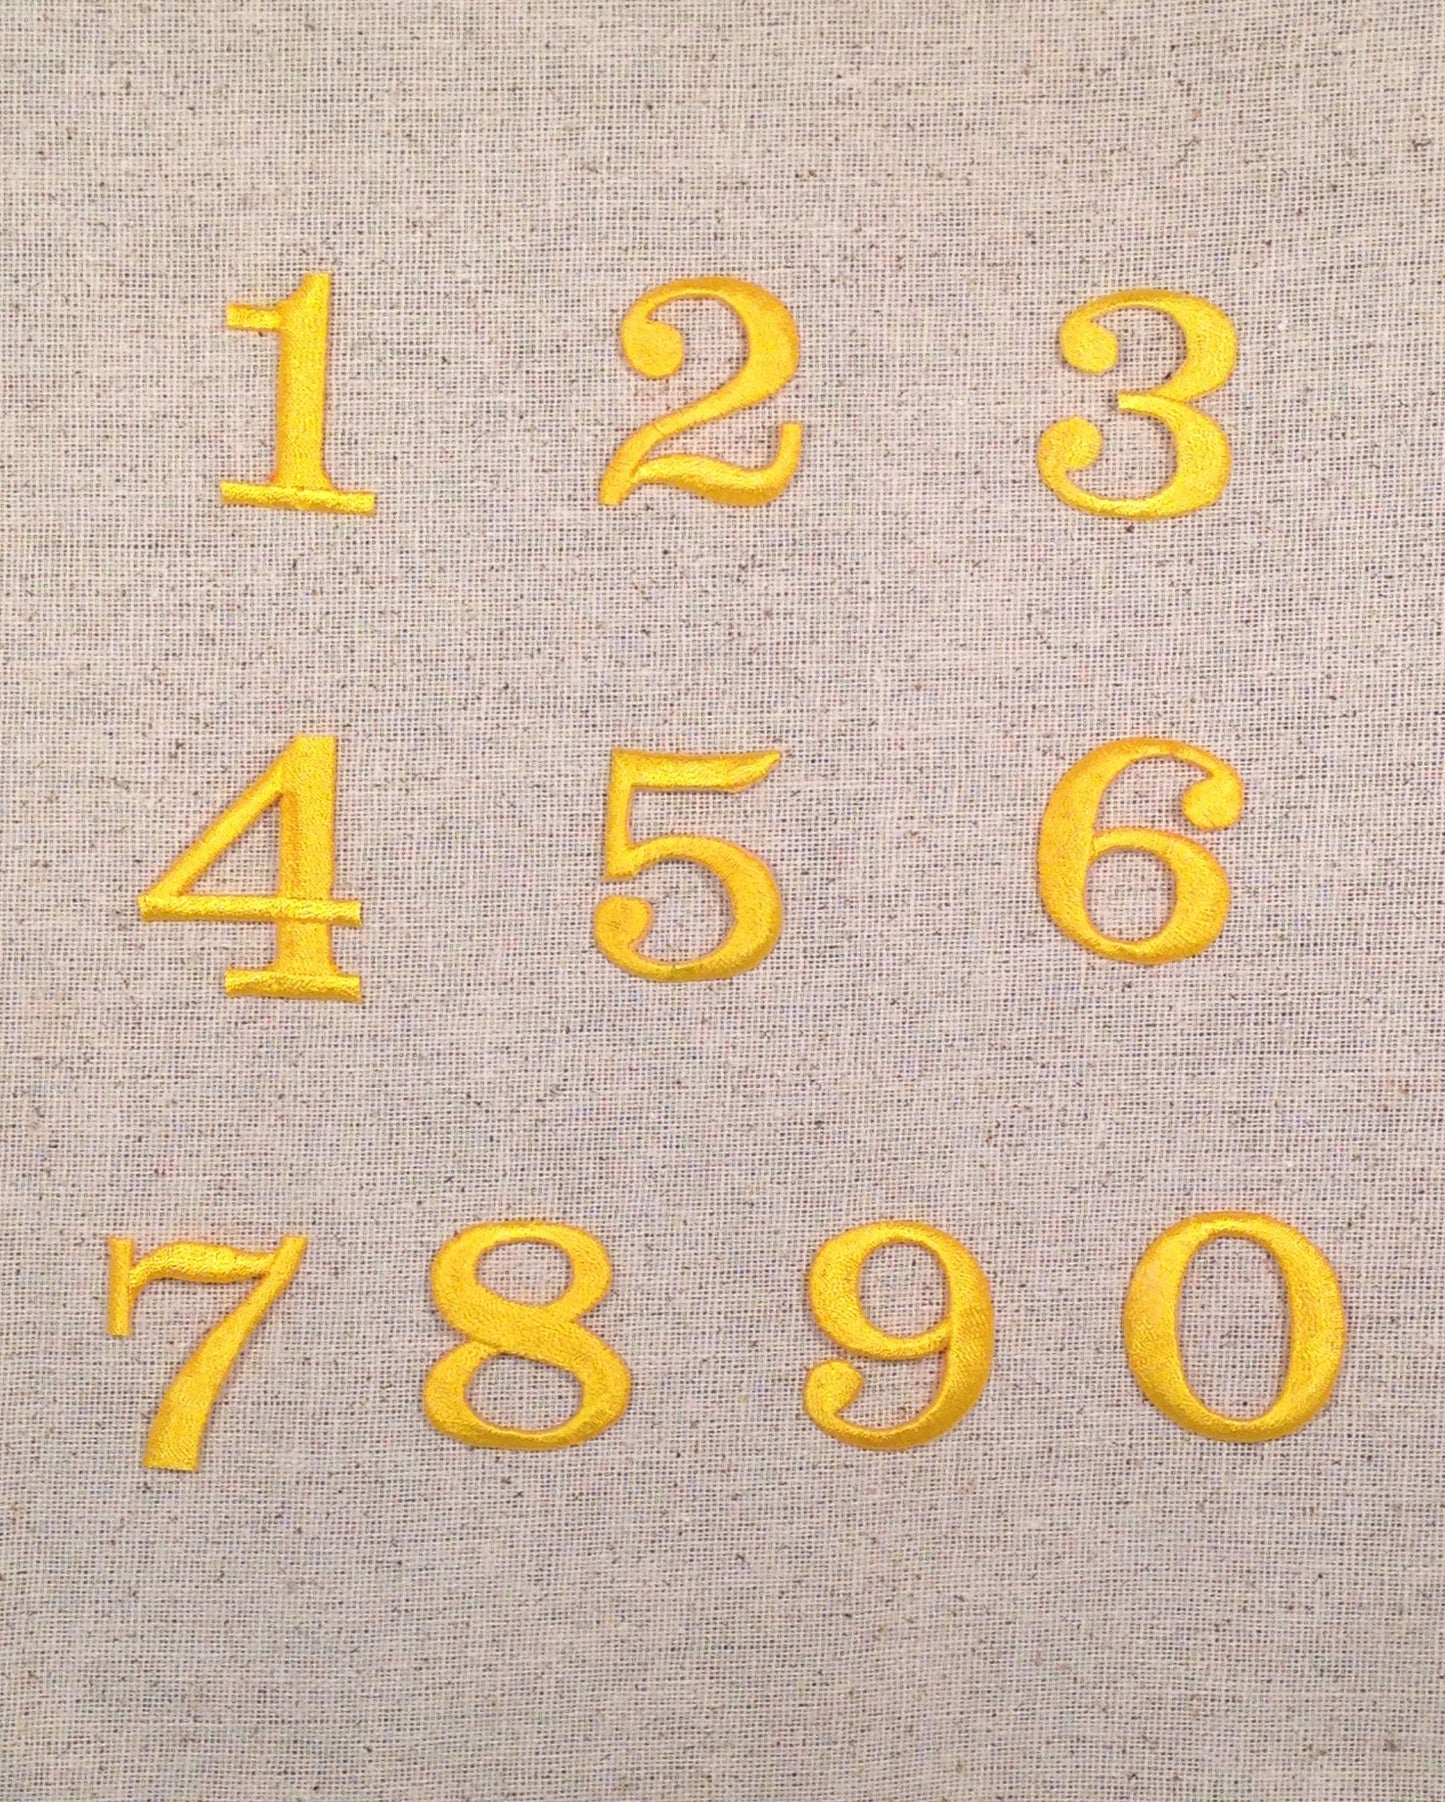 Numbers - 1.25 Inch - Yellow - Block Style - Iron on Applique - Embroidered Patch